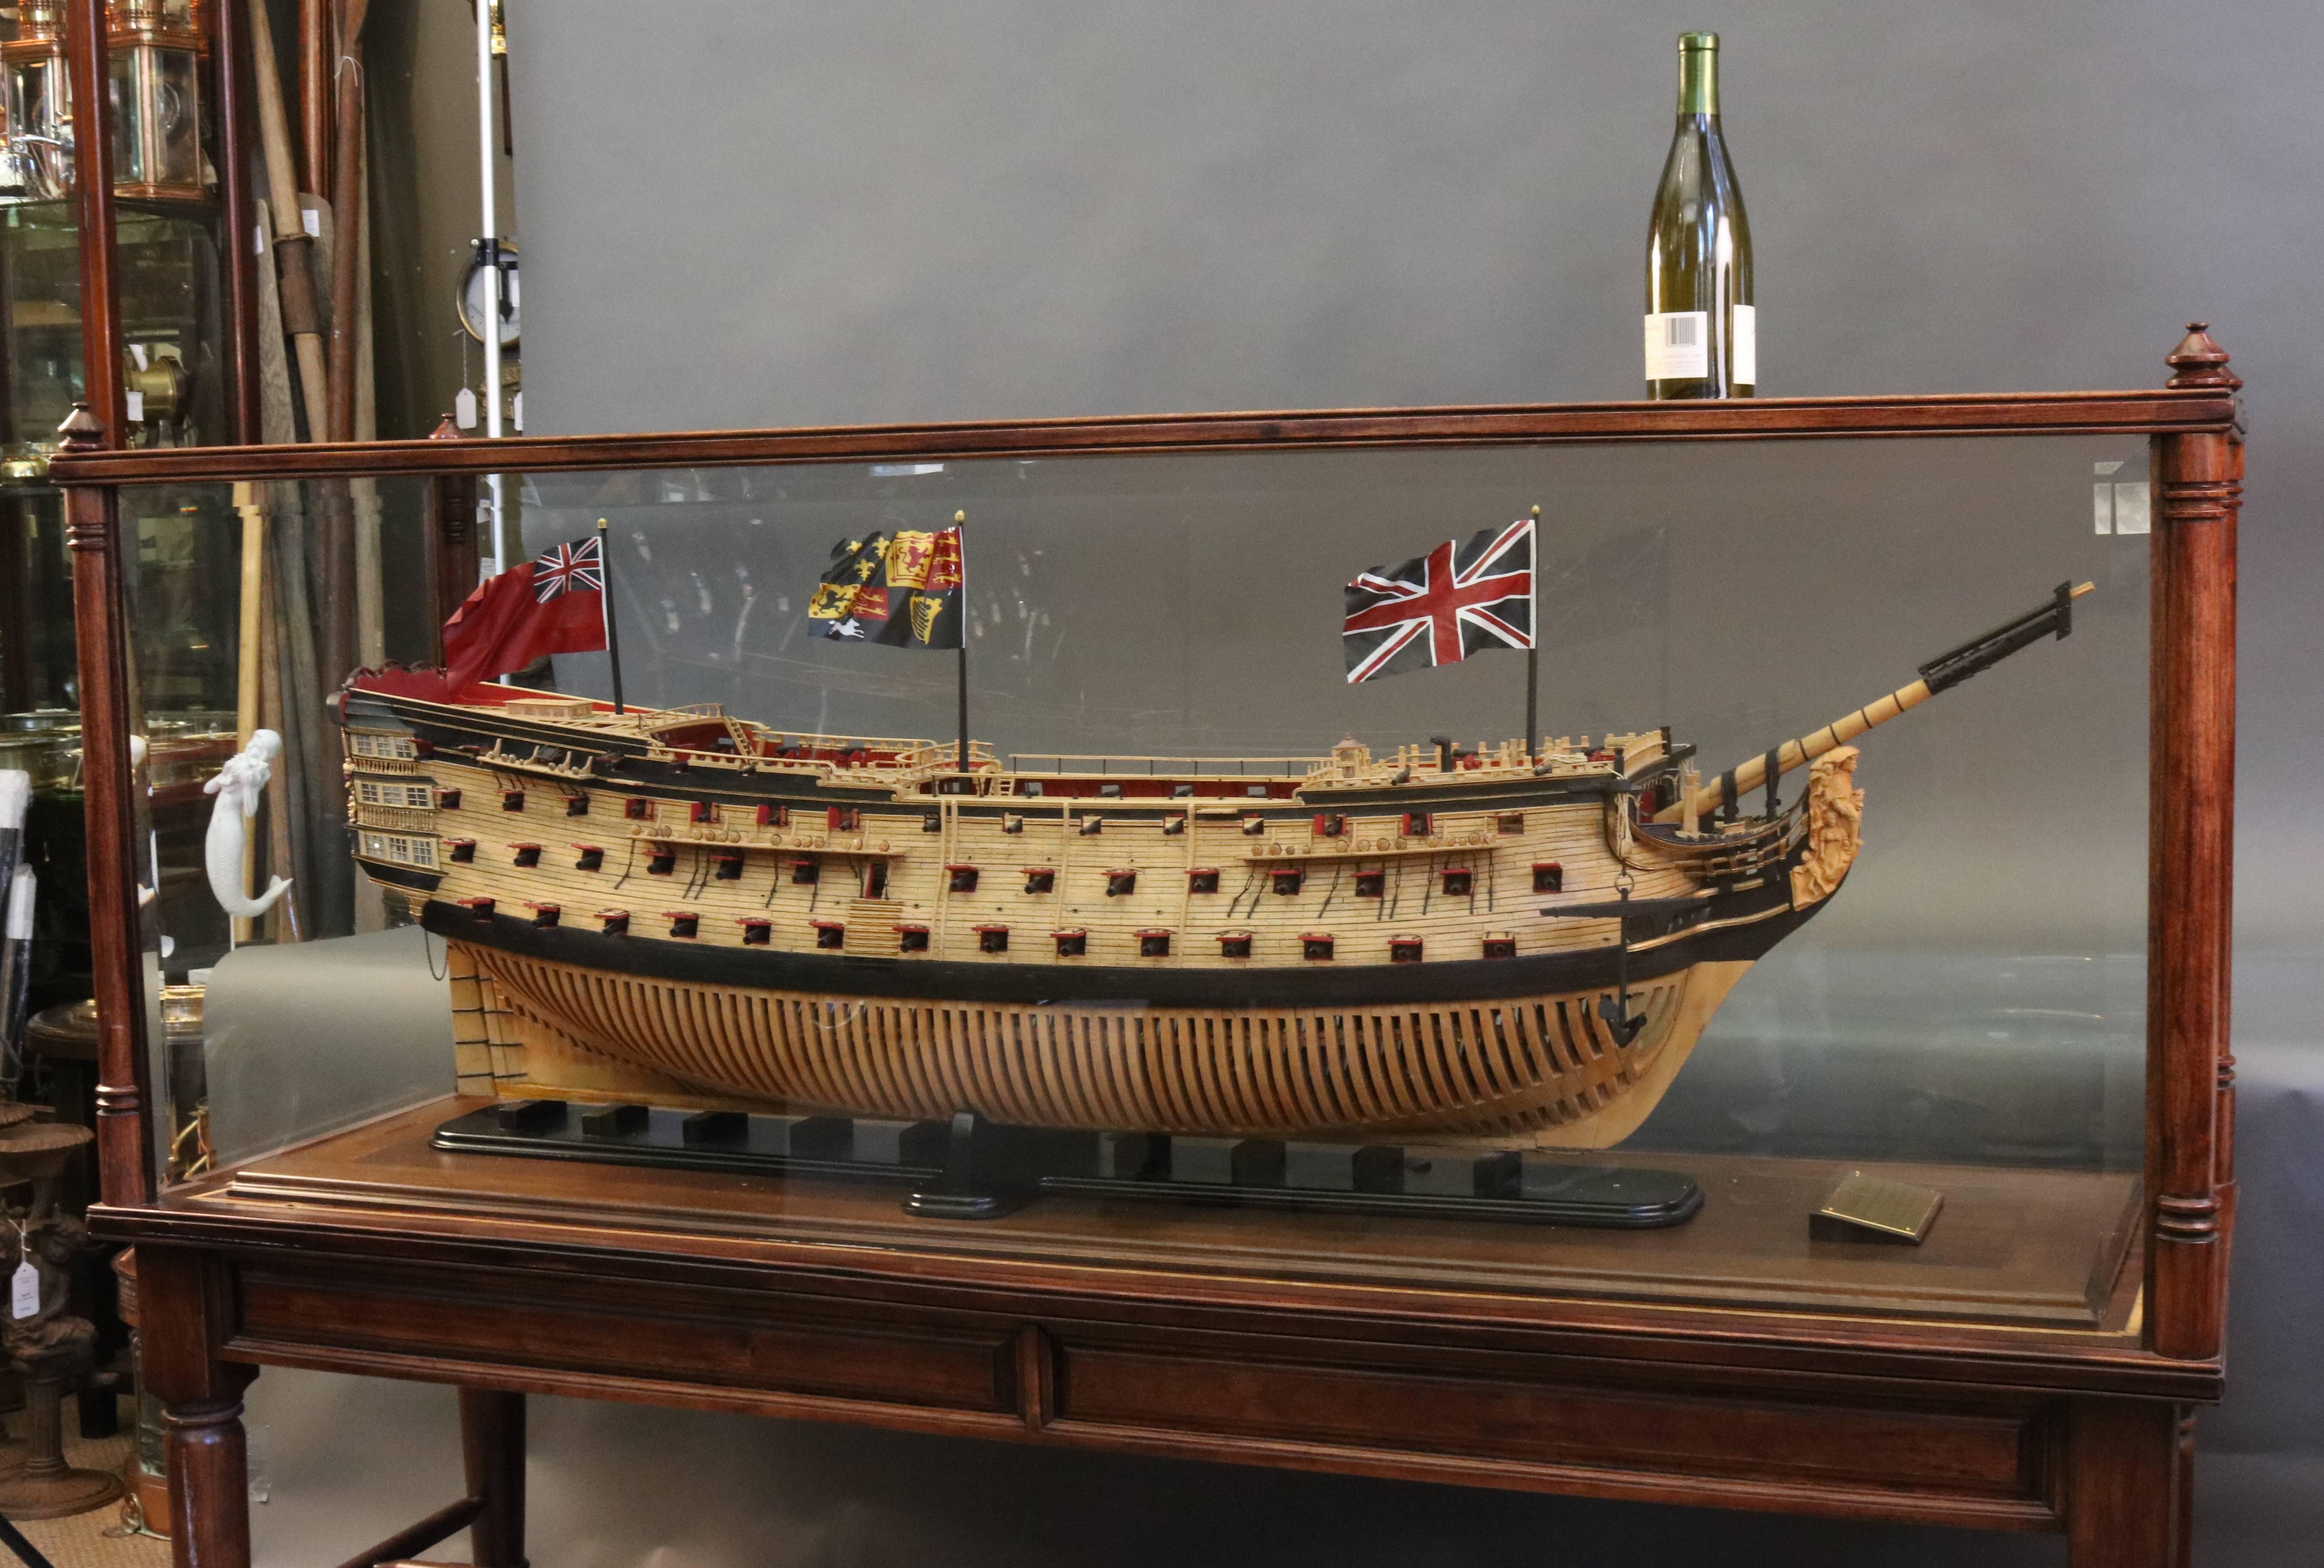 "Admiralty style ship model of the HMS ""Royal Sovereign"" by master modeler Robert Bruckshaw of Ohio. The model is built as was the original ship showing framing, decks, guns, etc. Pennants fly from flagstaffs. Deck details